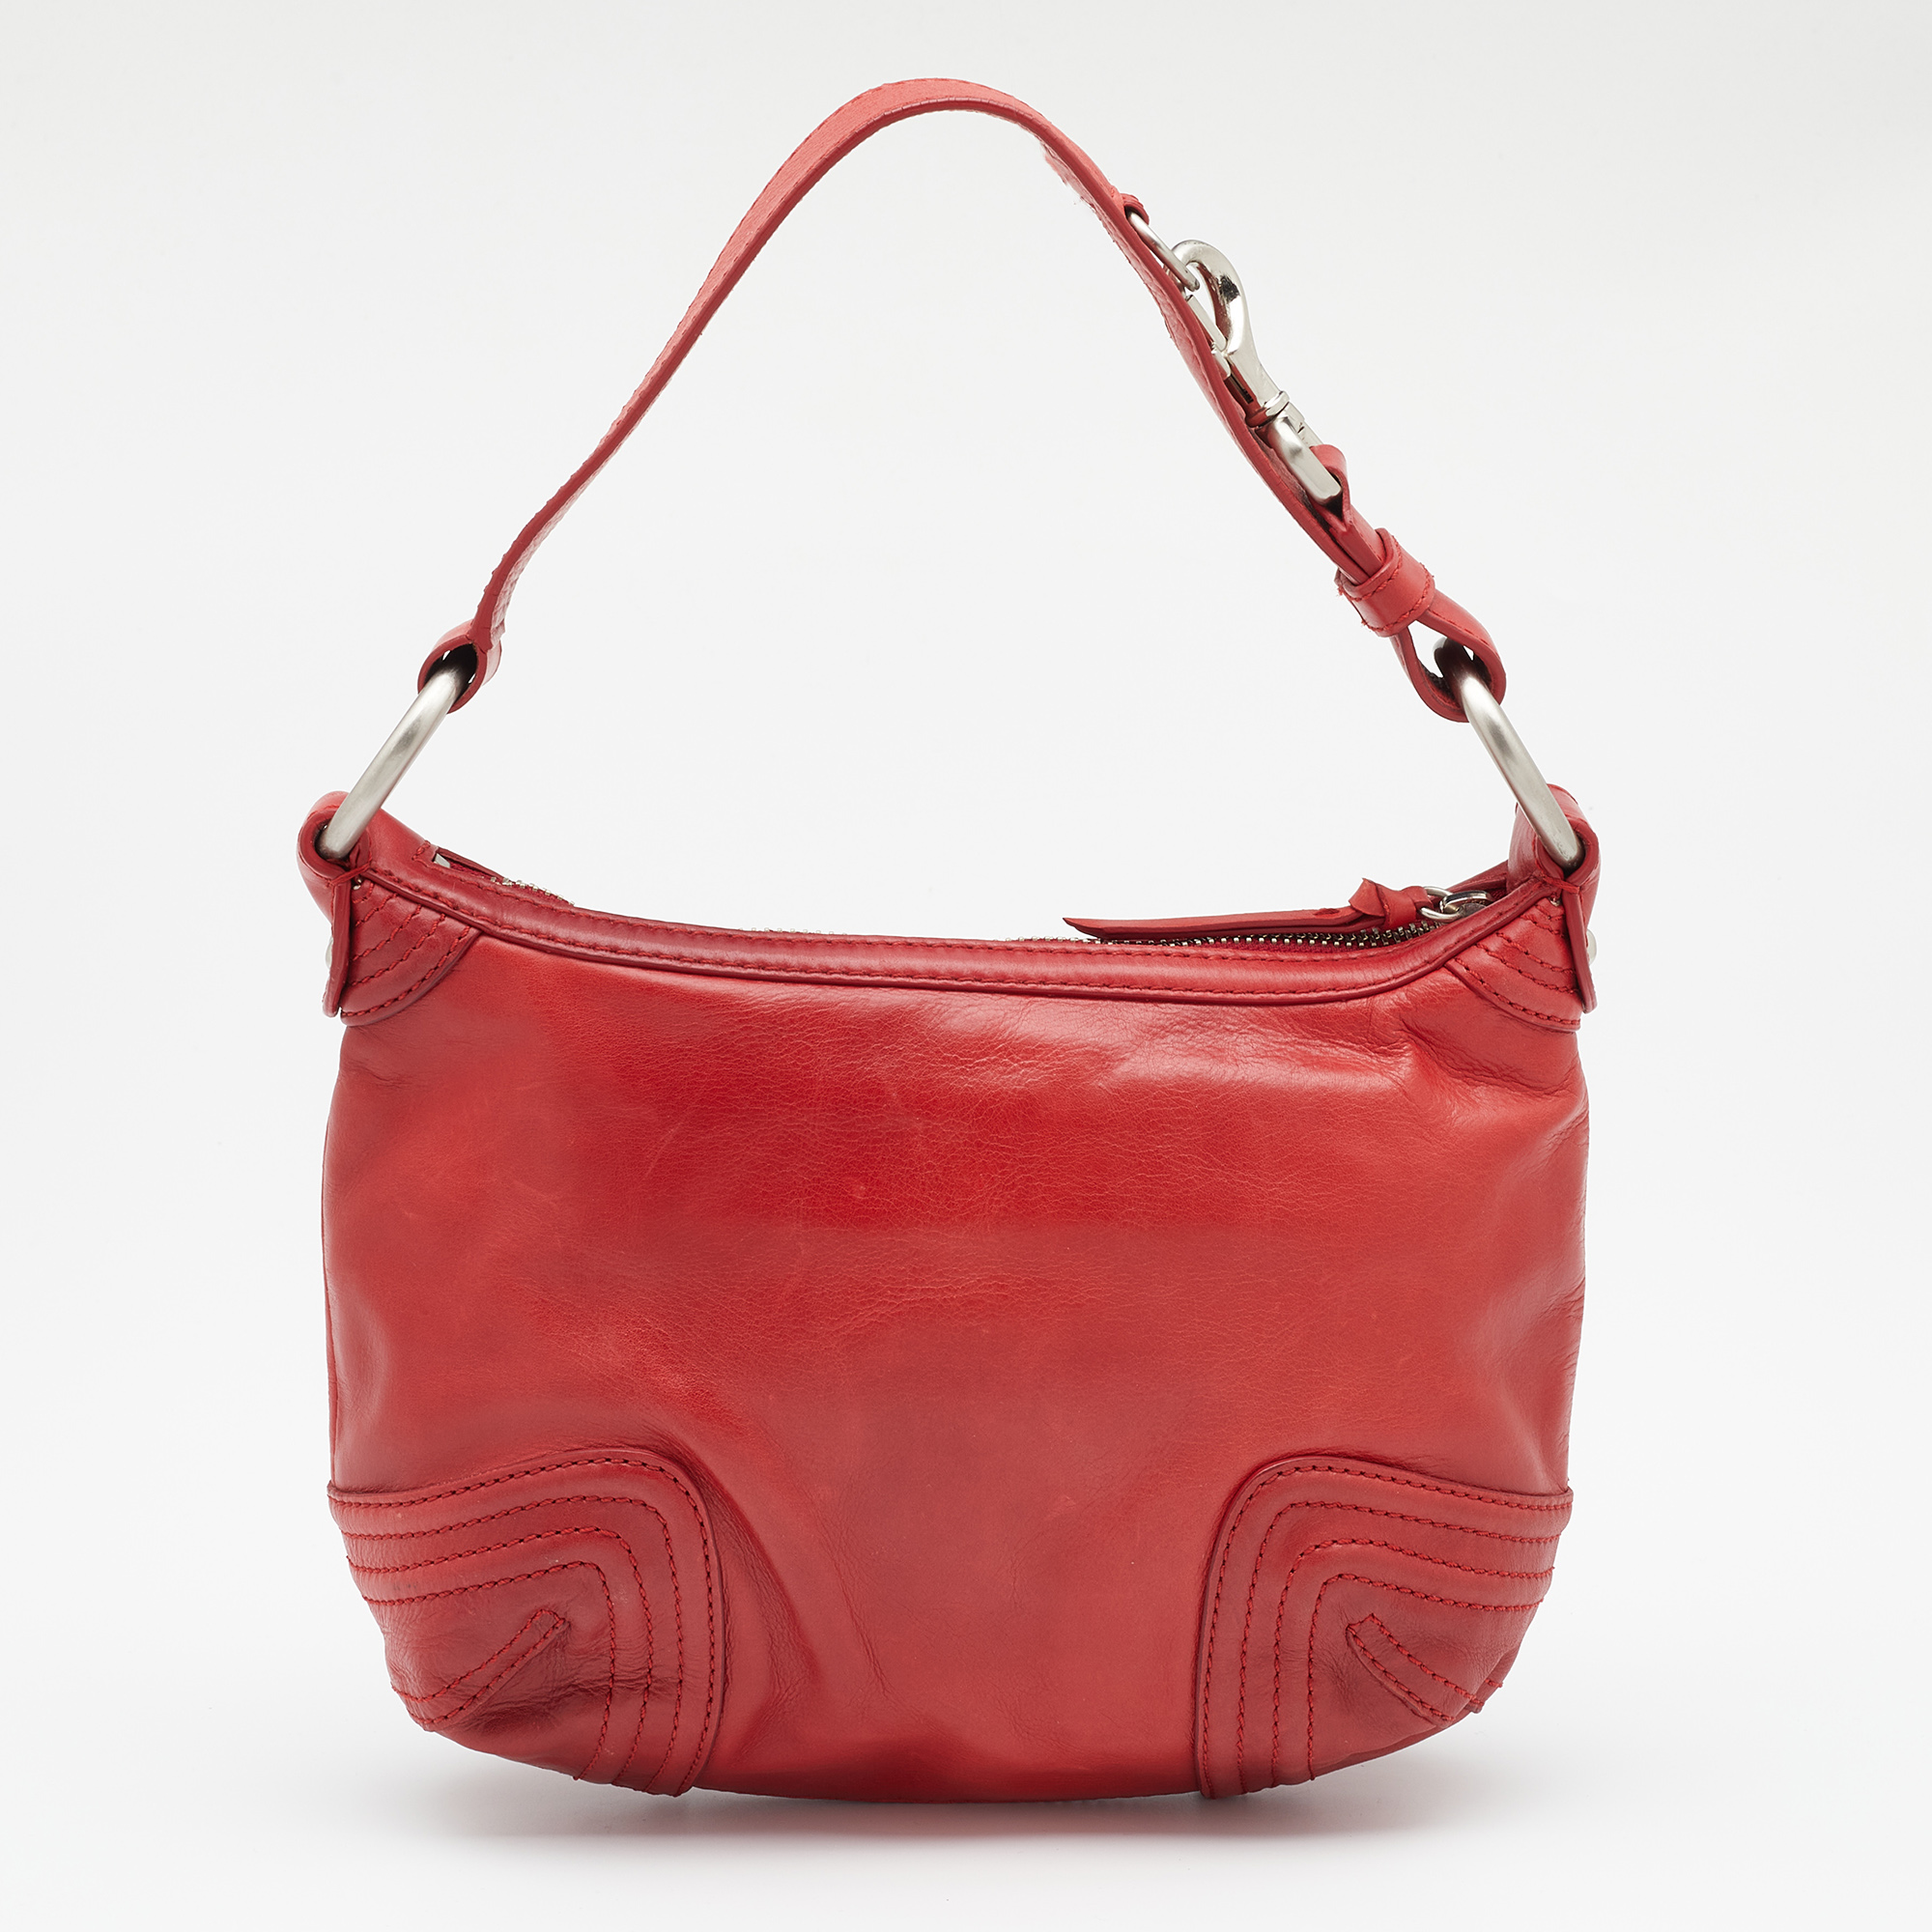 DKNY Red Leather Hobo